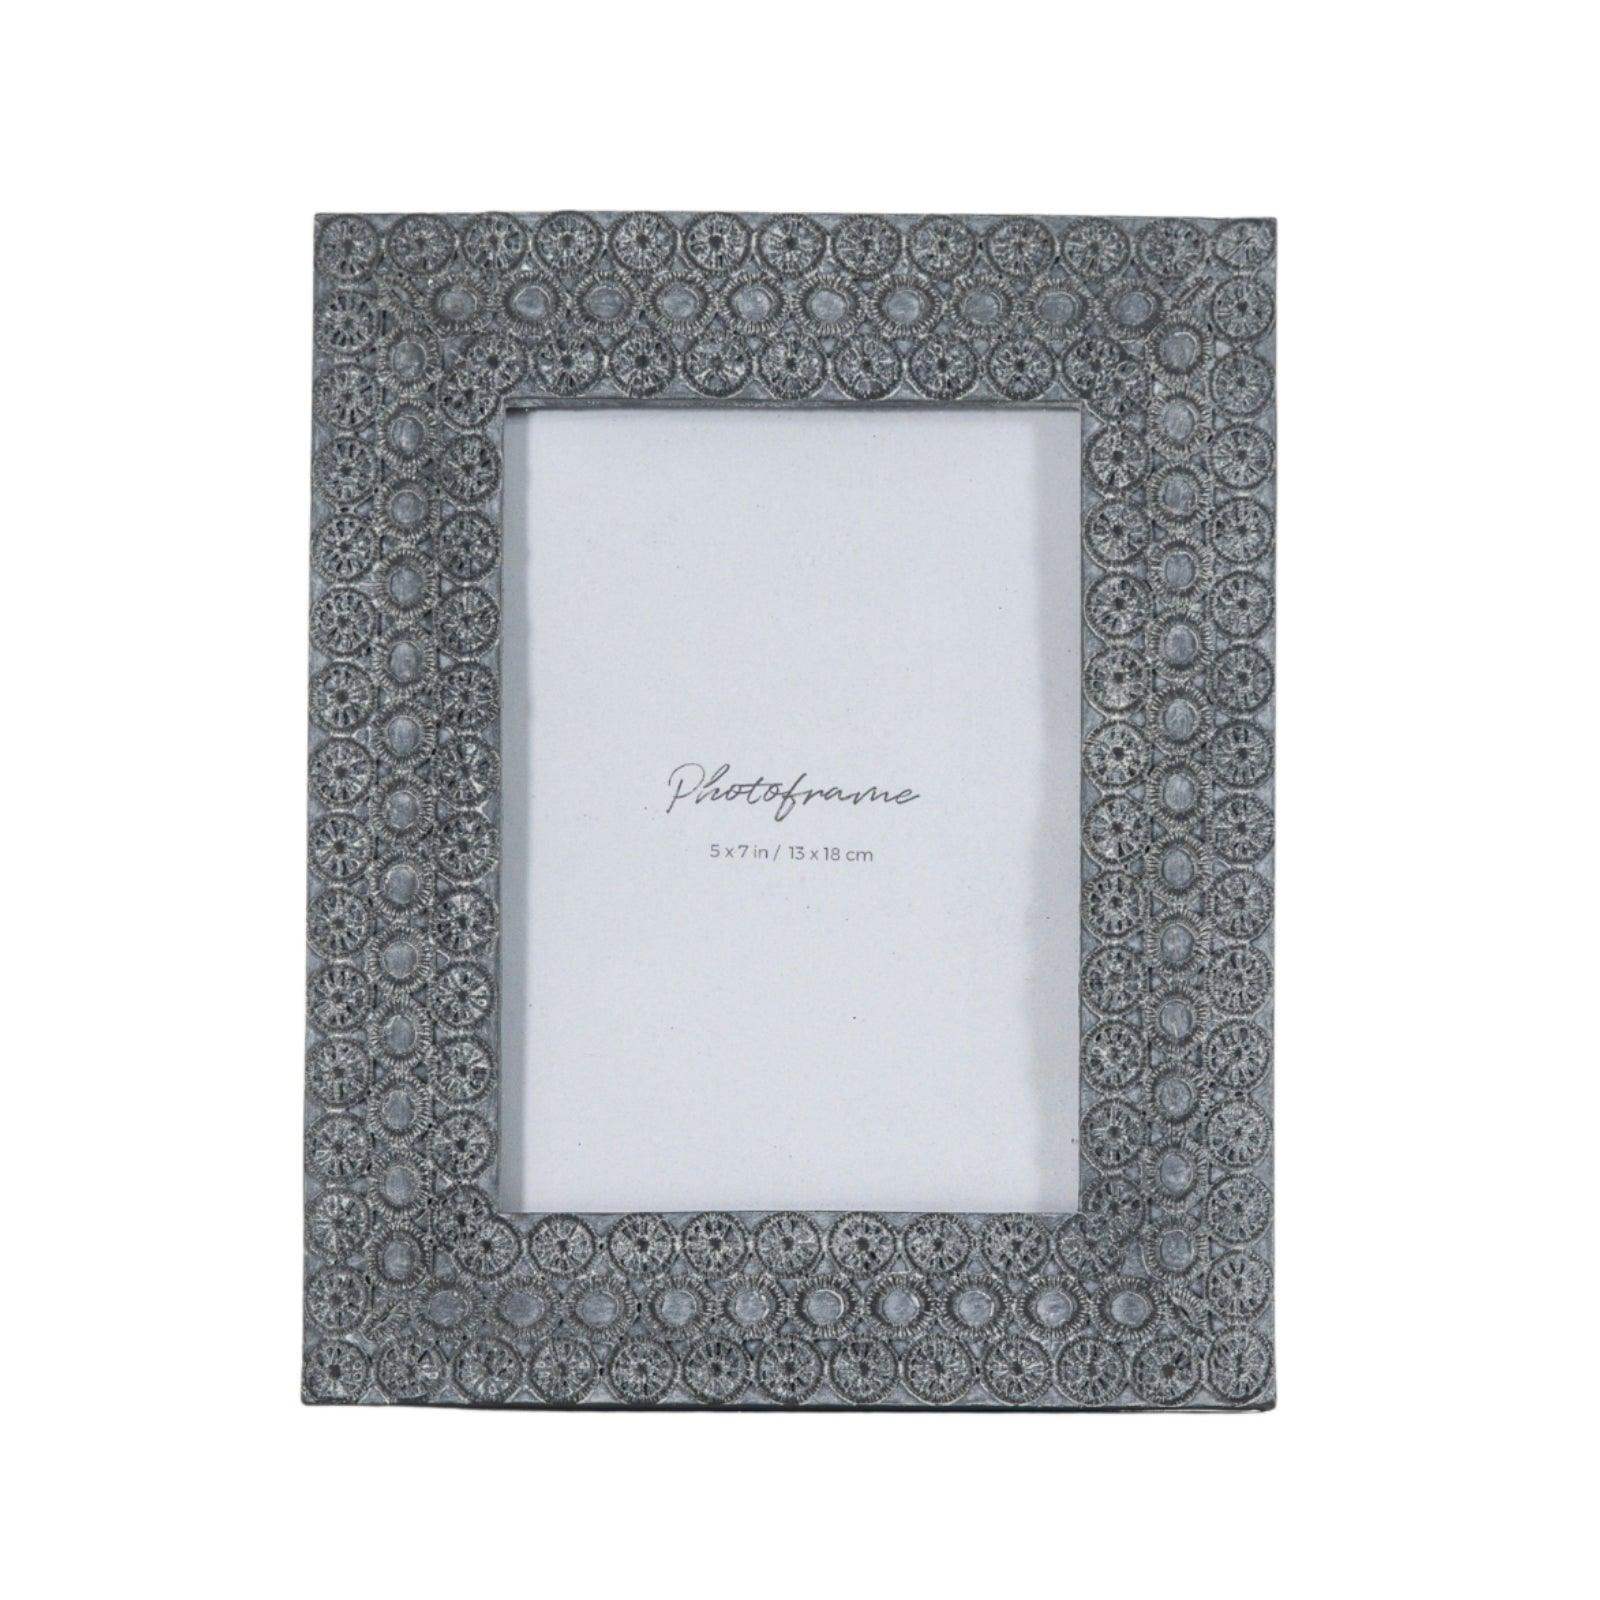 Blue Textured Pattern Photo Frame - The Farthing